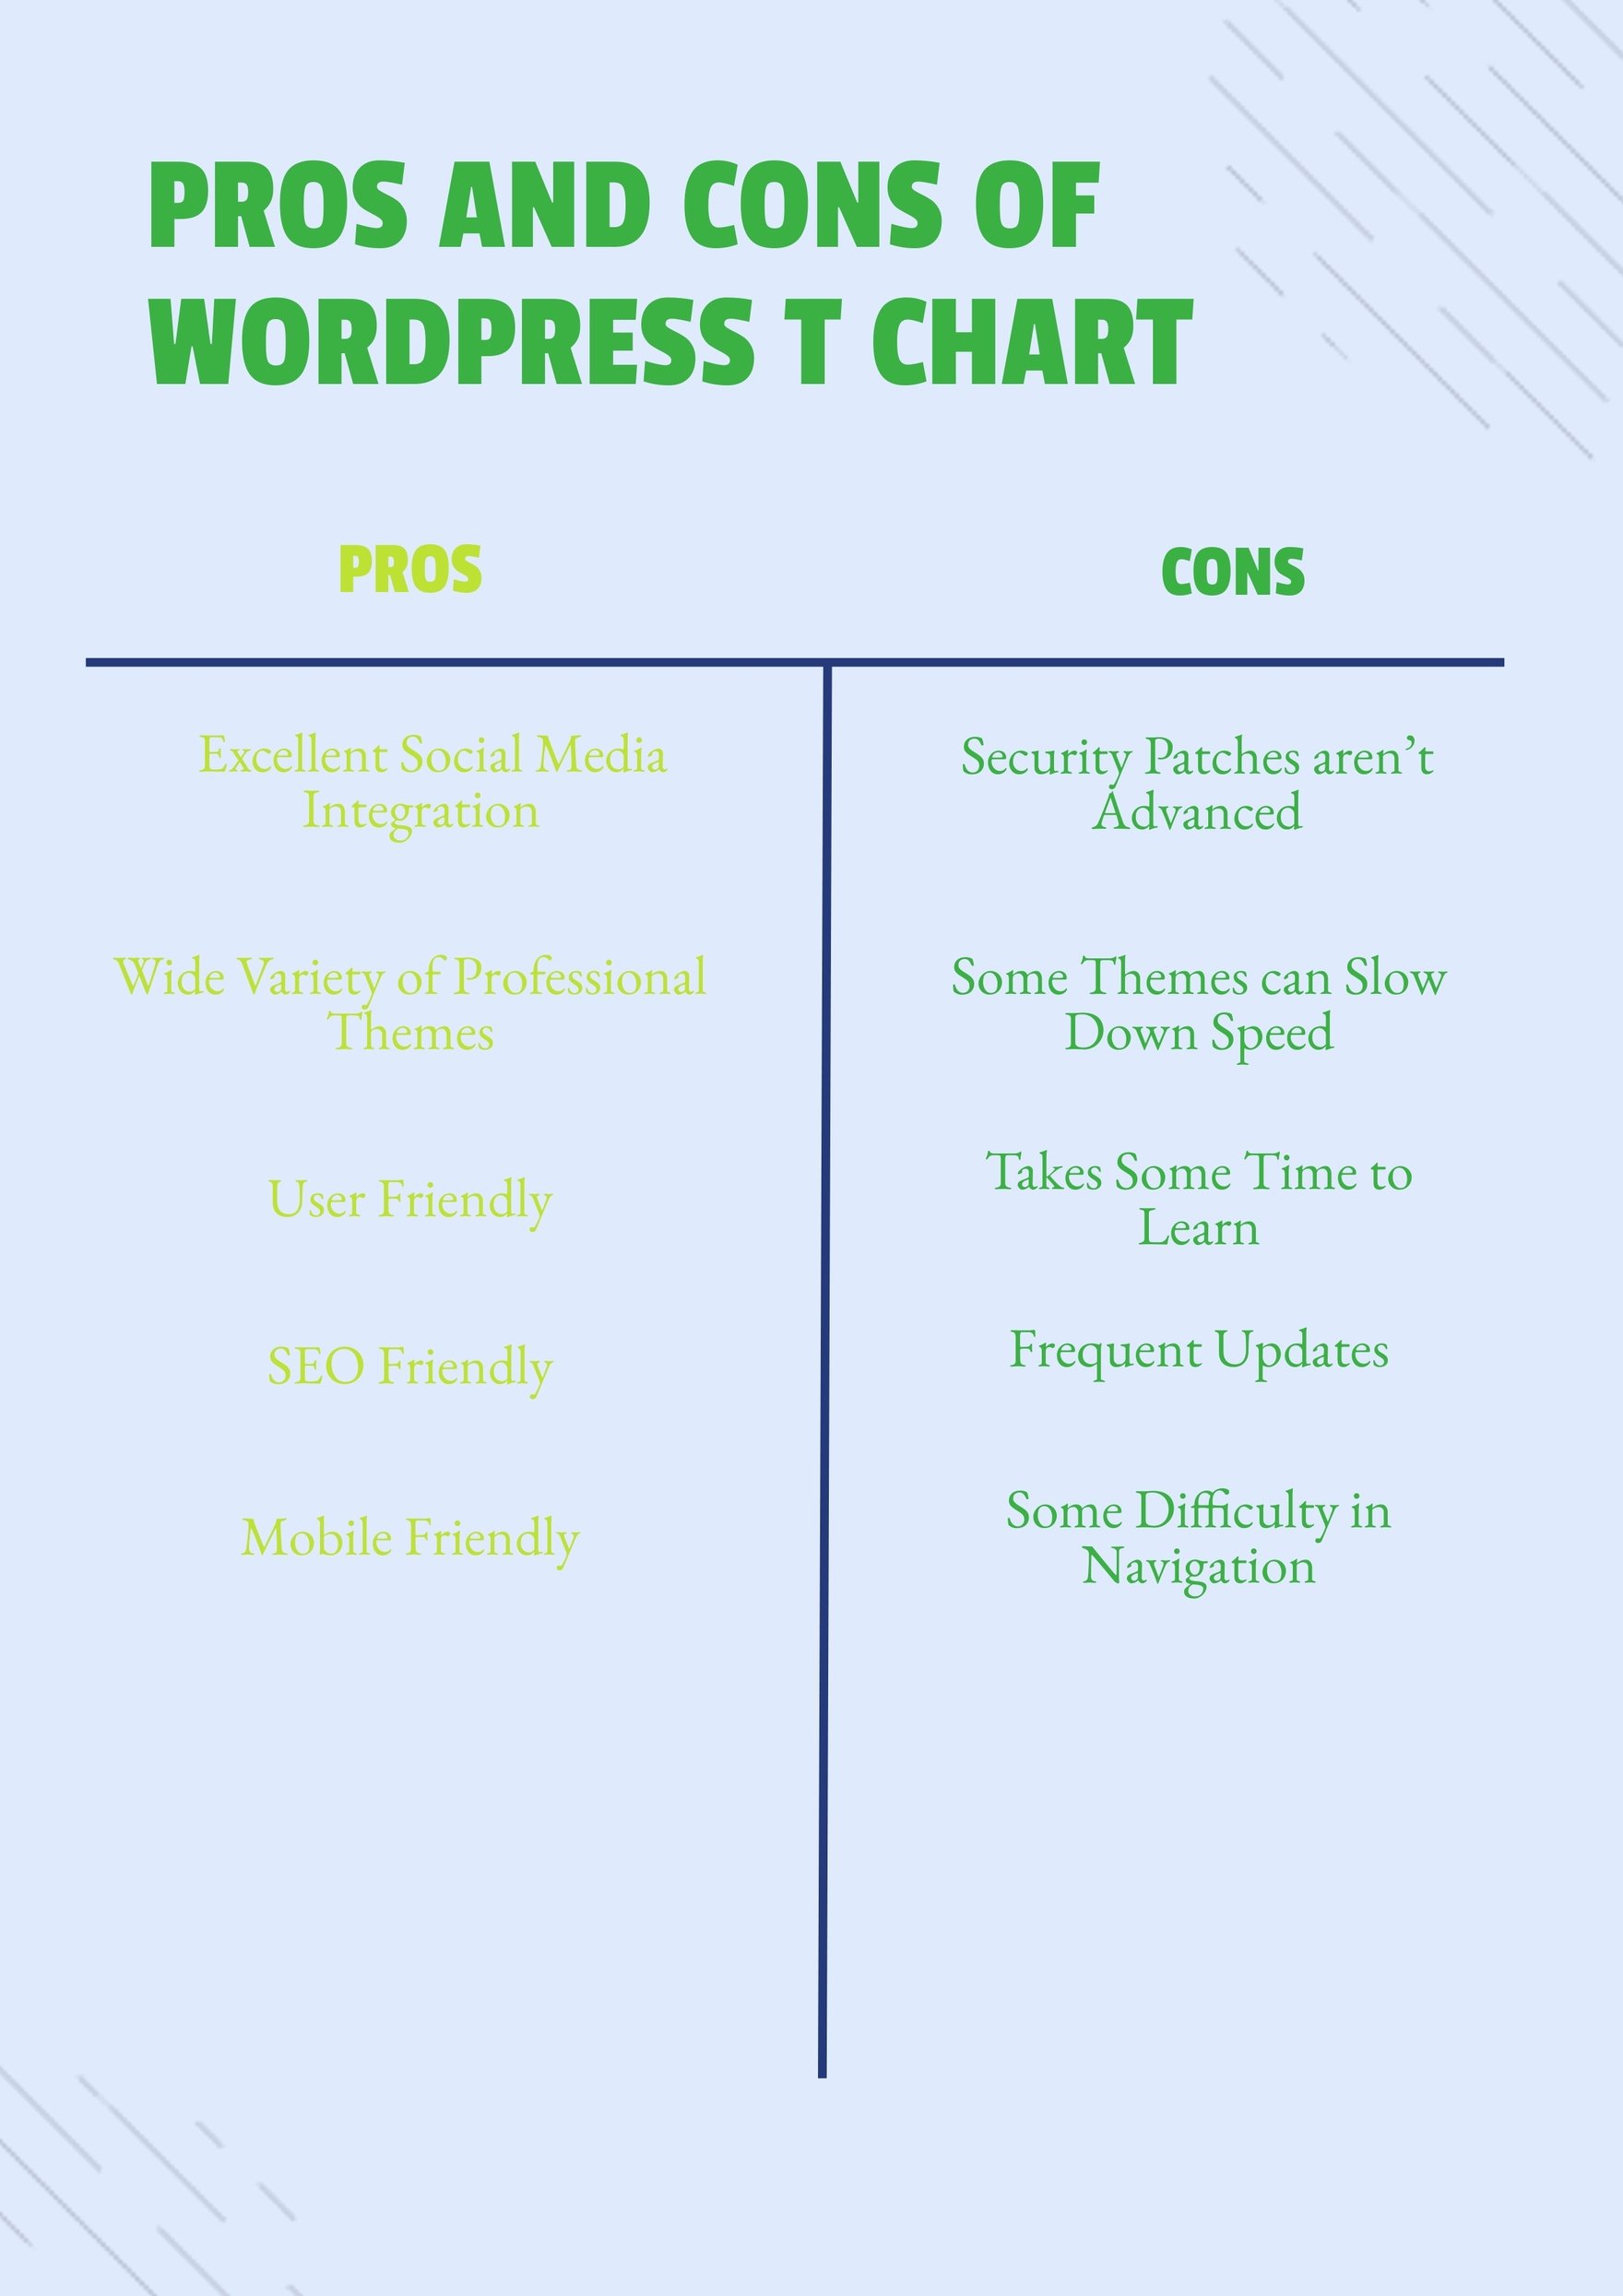 Pros and Cons of WordPress T-Chart in PDF, Illustrator